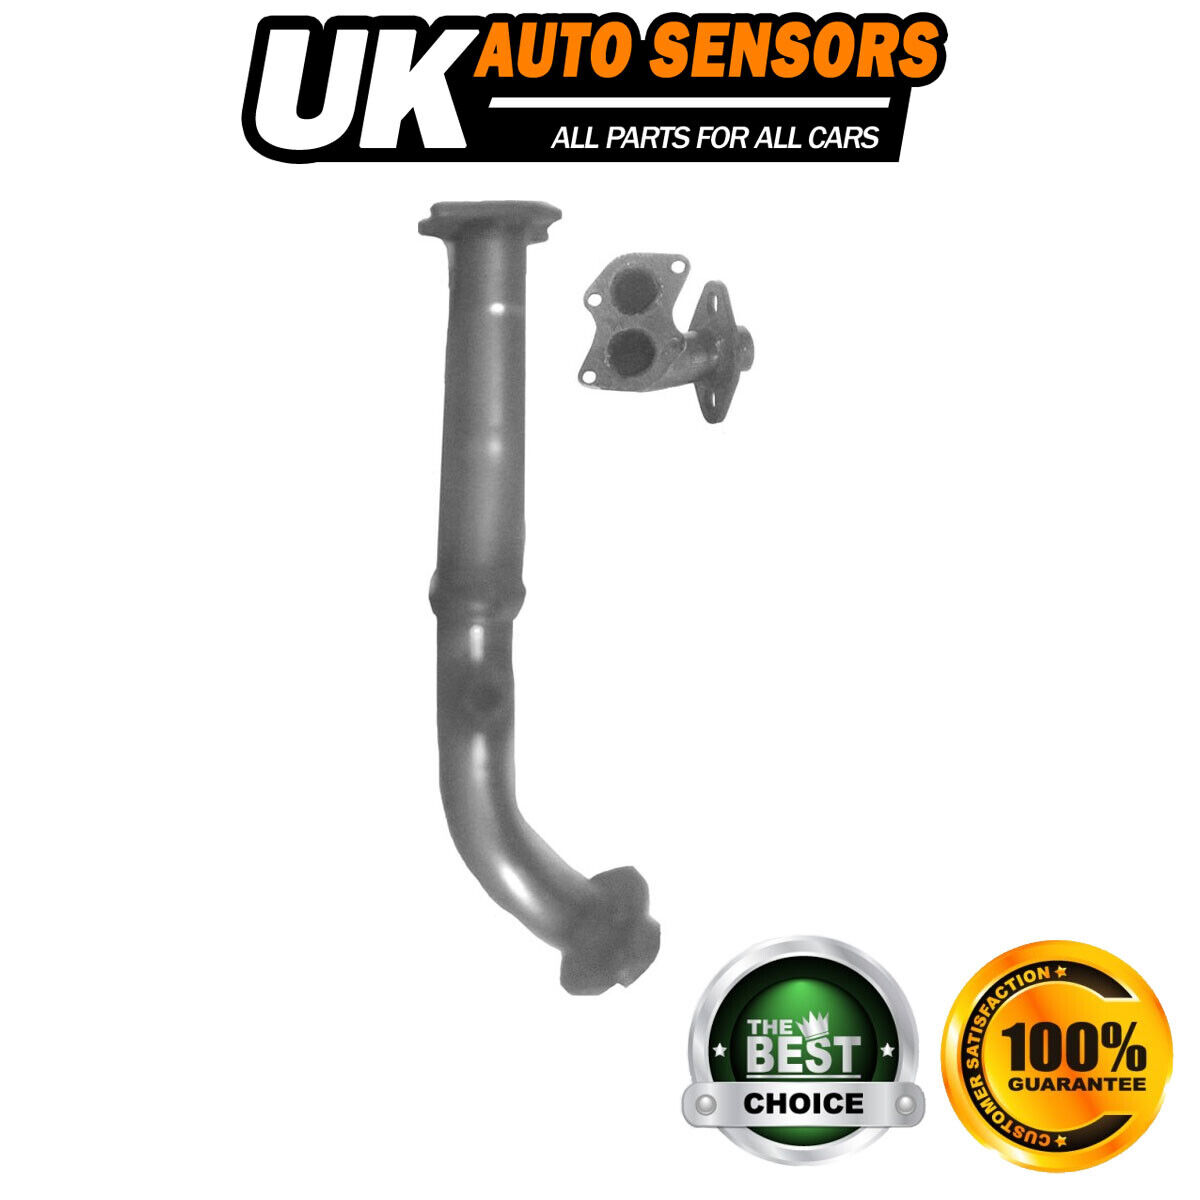 Fits Skoda Felicia Favorit 1.3 Exhaust Pipe Euro 2 Front AST 7591415